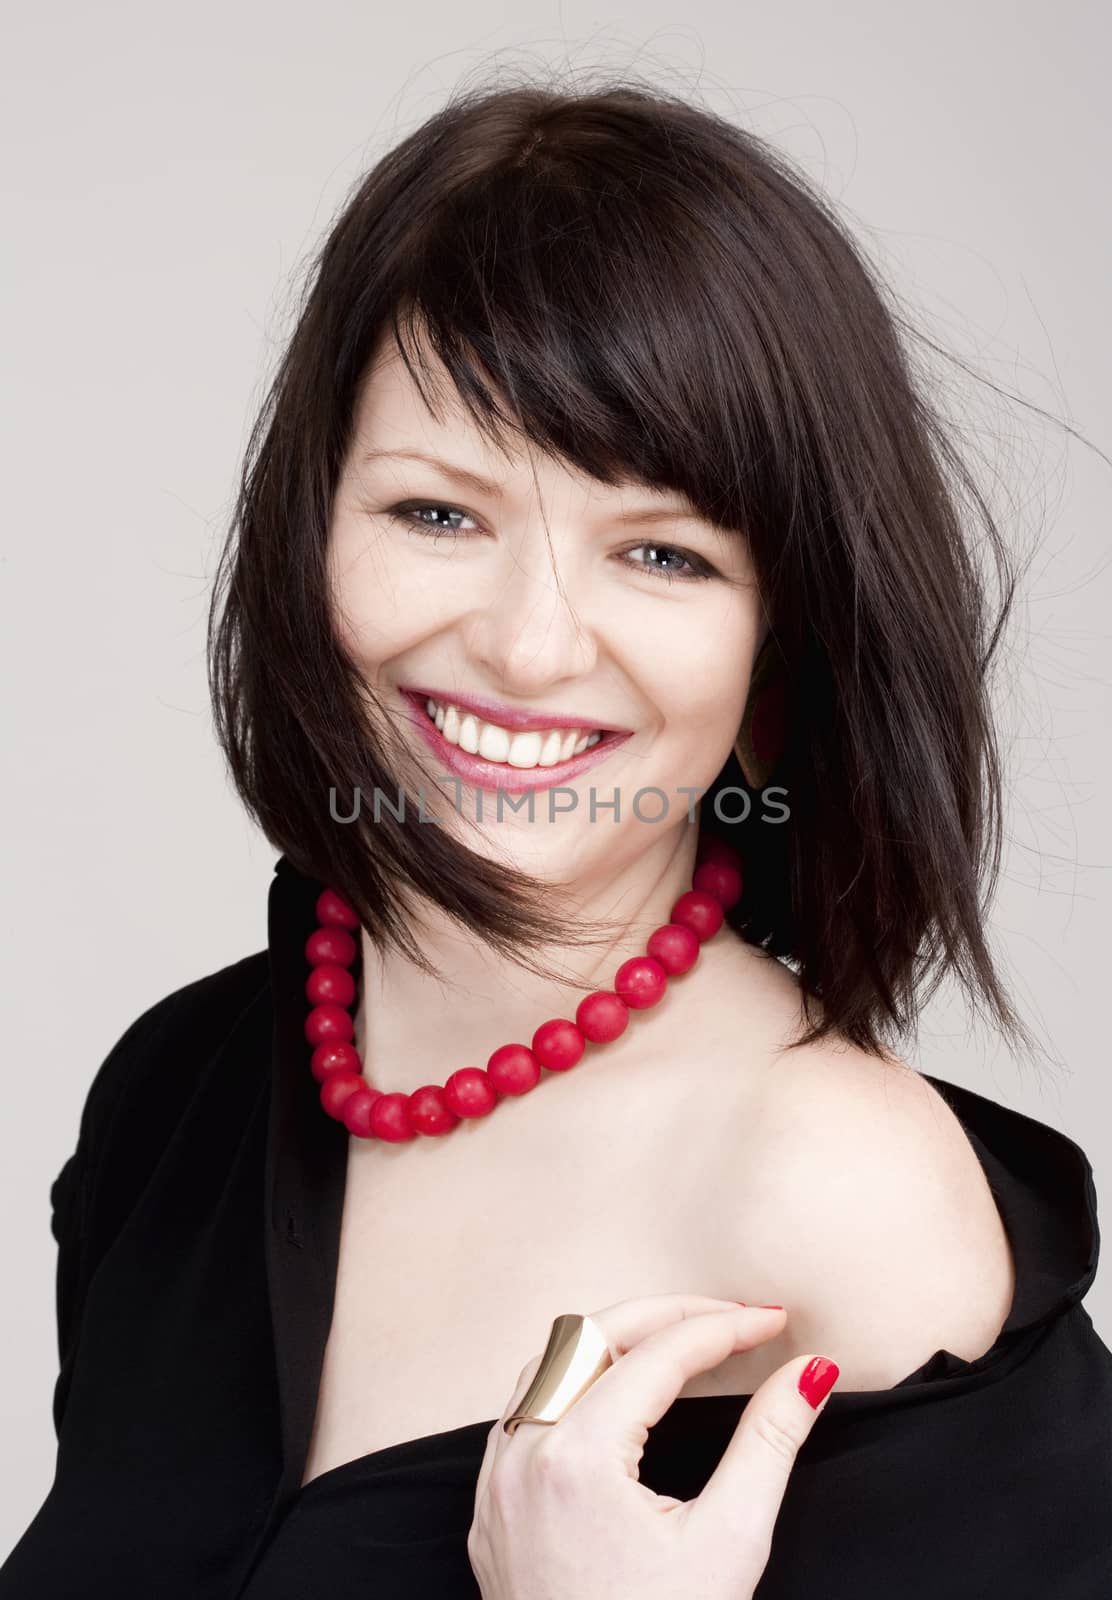 Portrait of a Young Beautiful Woman with Dark Brown Hair Smiling